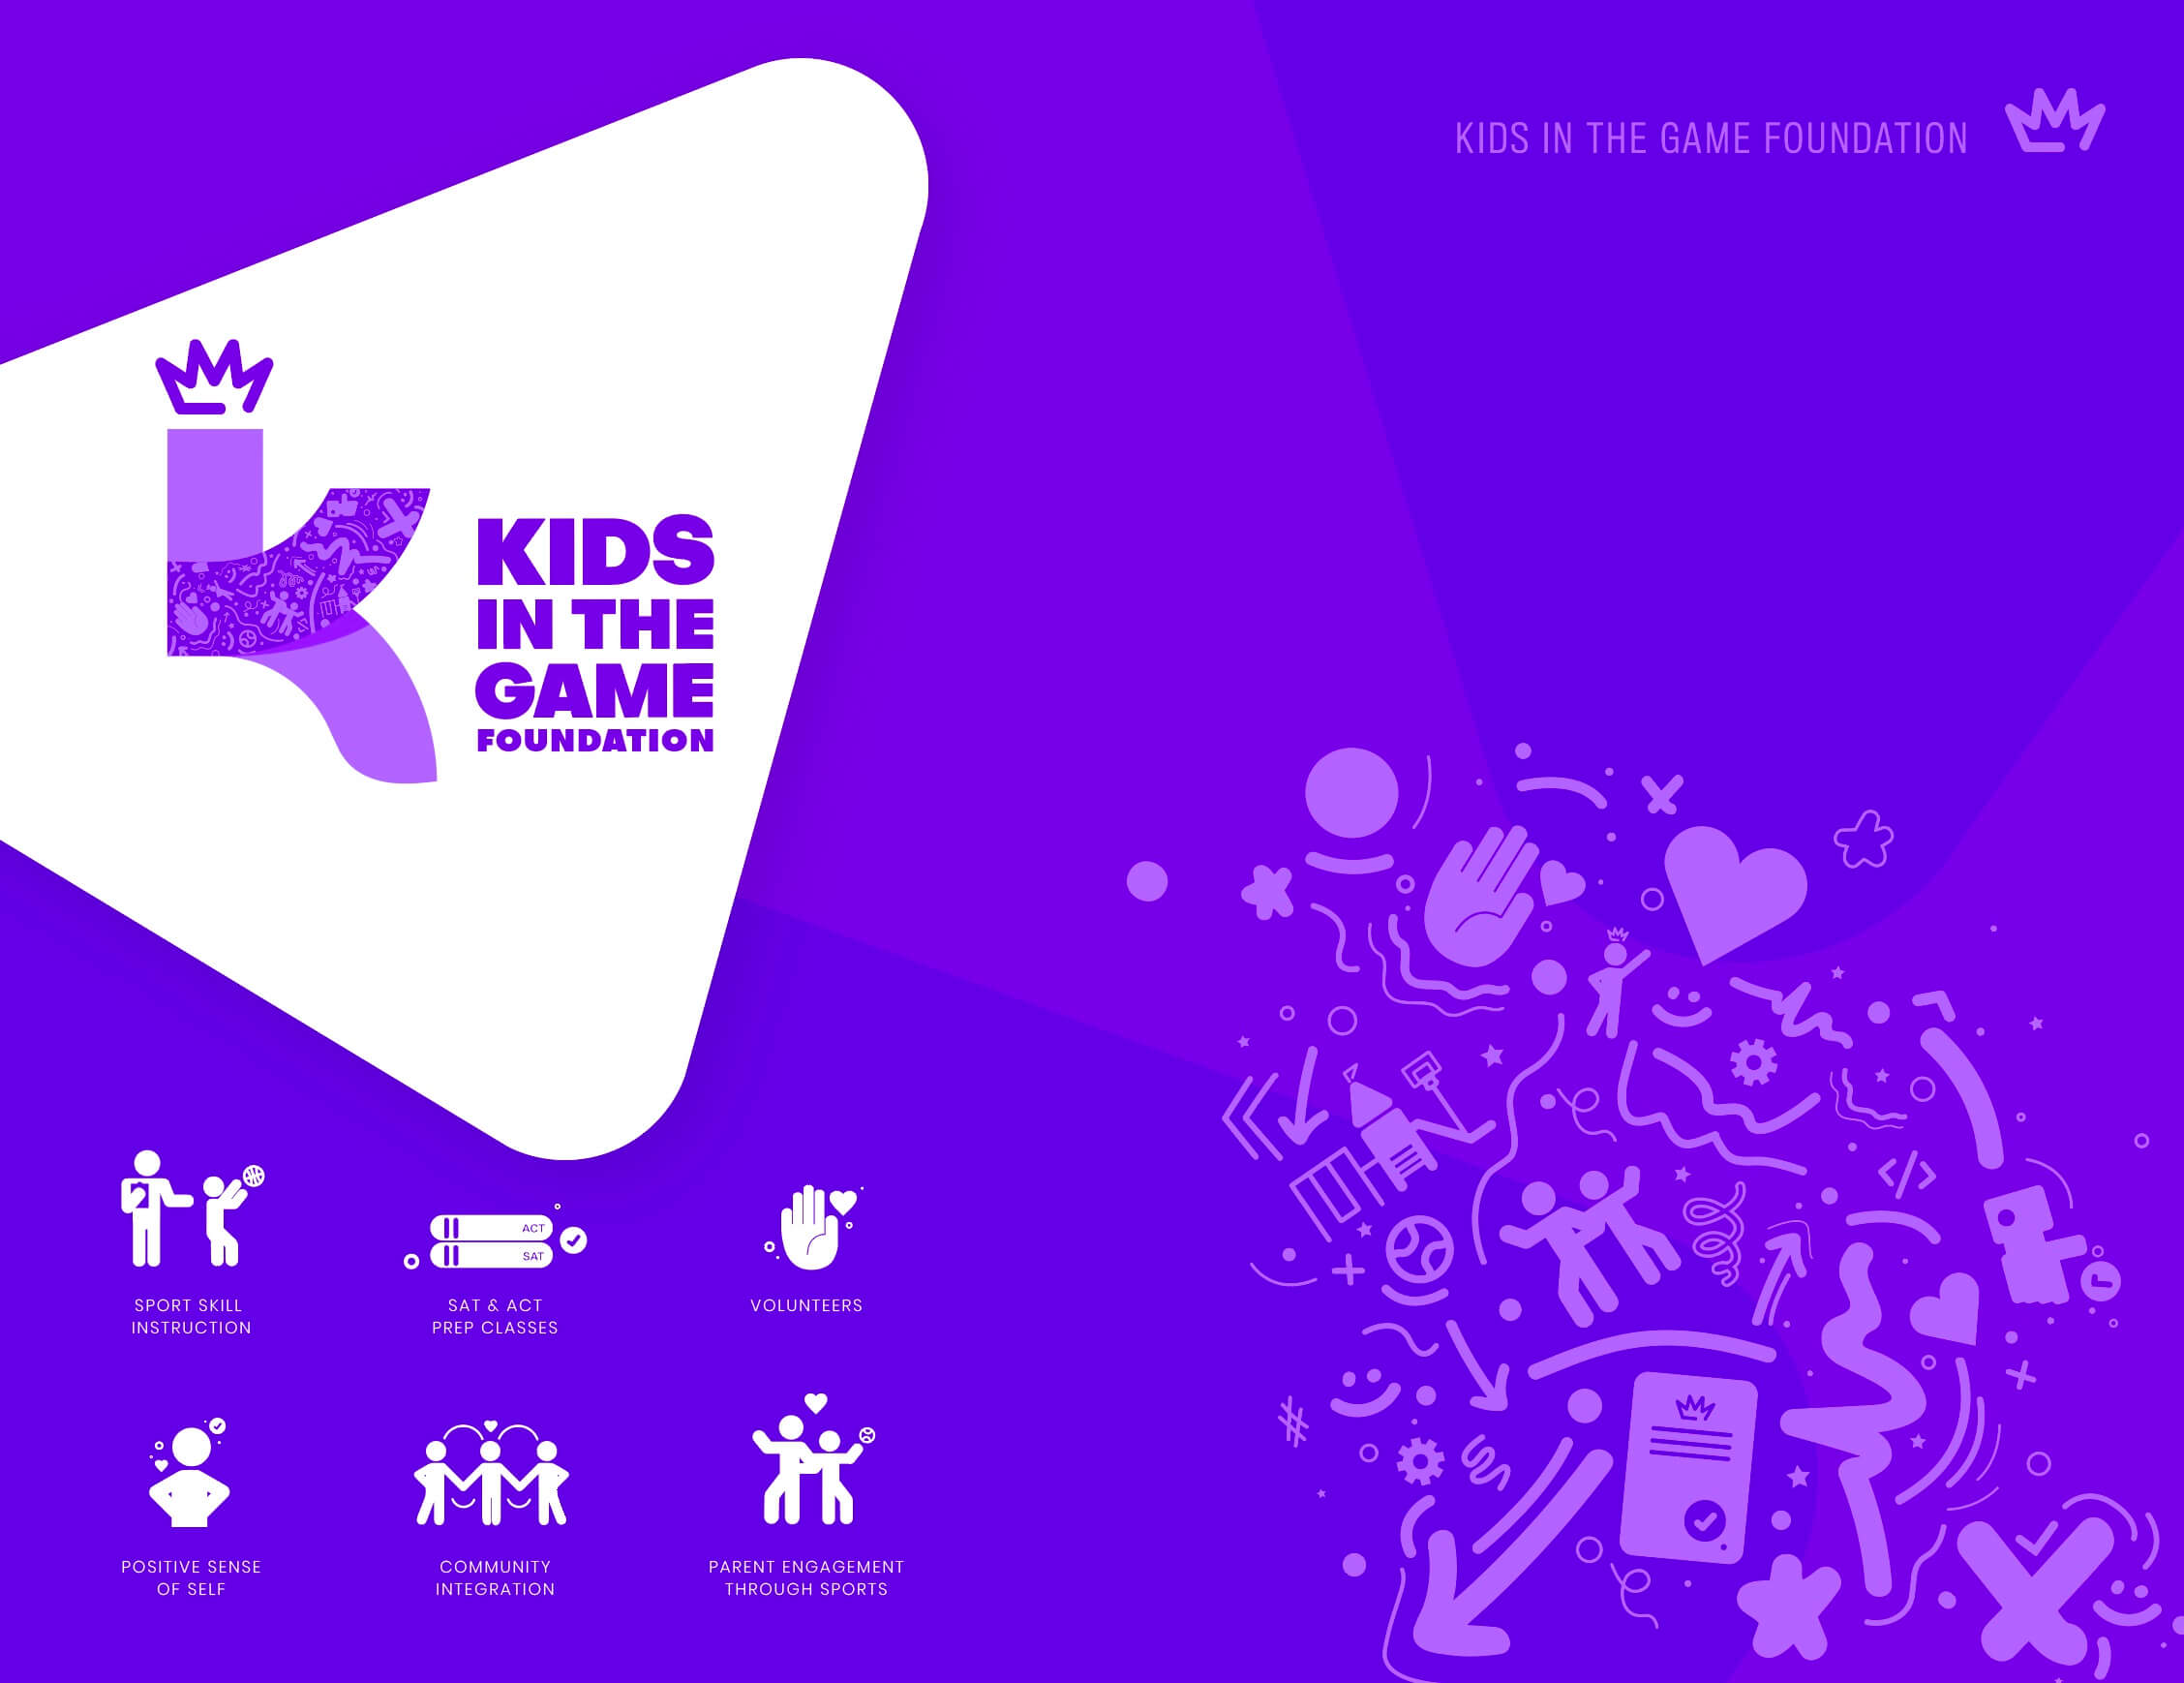 Kids In the game sub brand designs